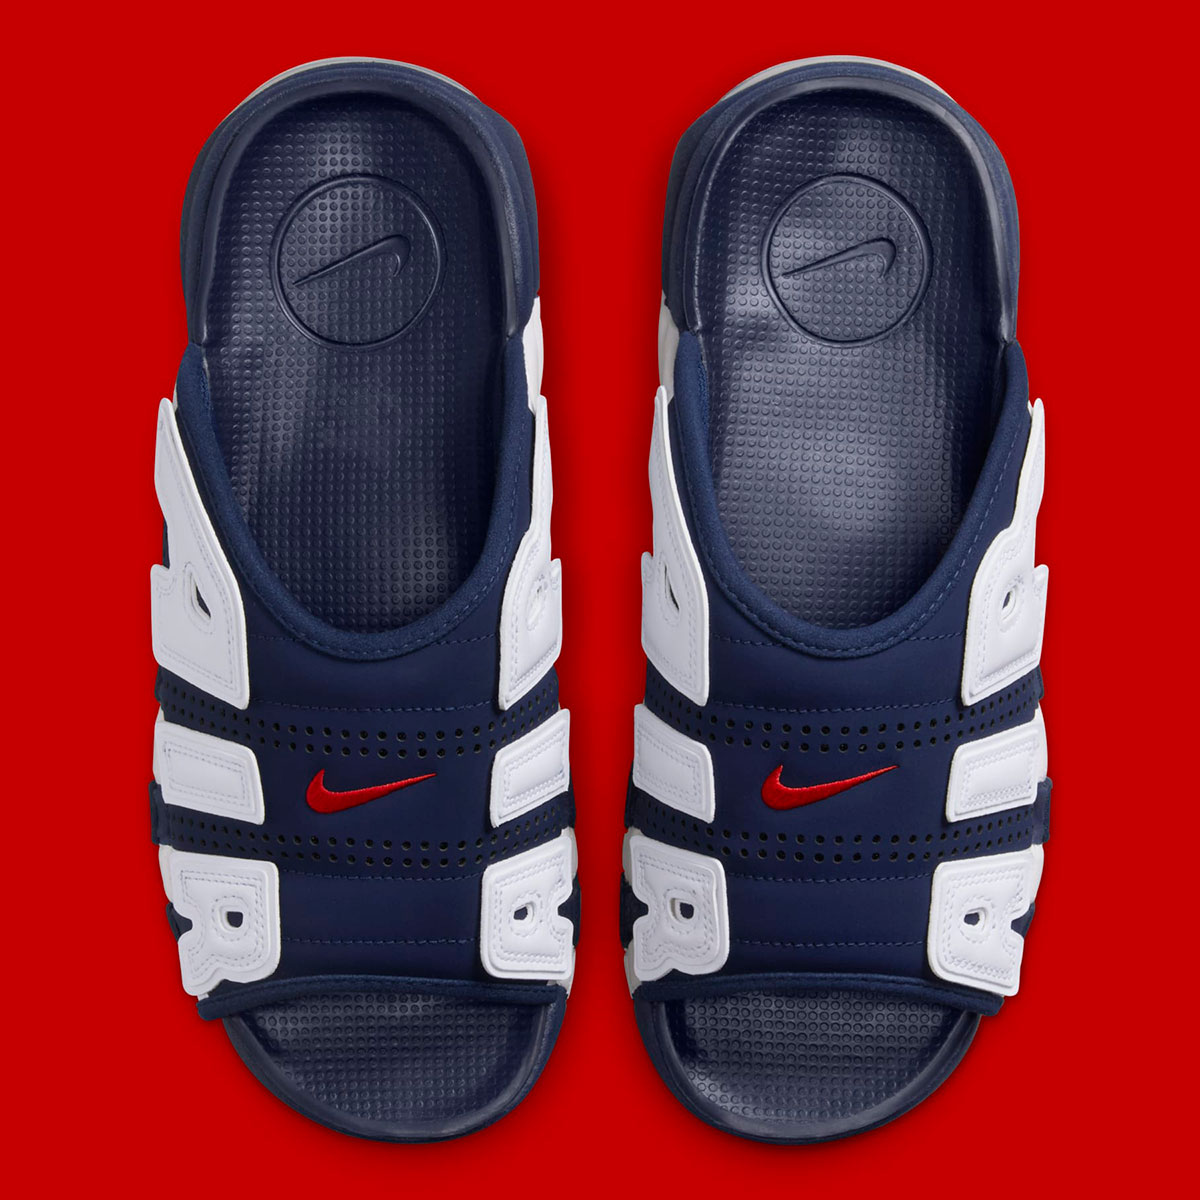 Nike Air More Uptempo Slide Olympic Fq8700 400 3